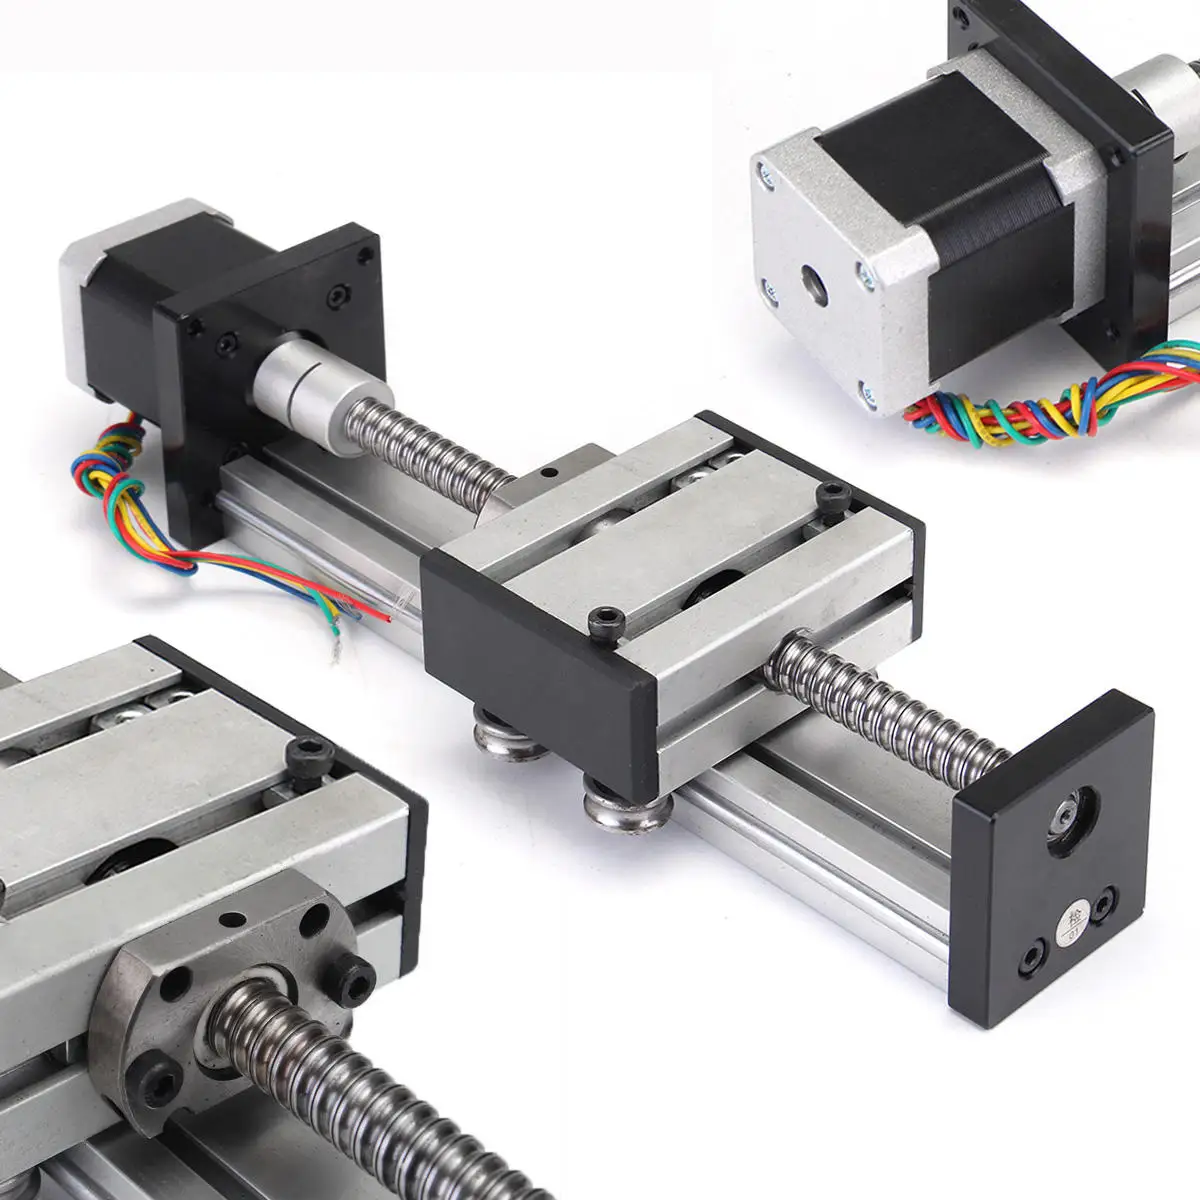 GUONING-L Tools Long 100mm Stage Actuator Linear Stage 1204 Ball Screw Linear Slide Stroke with 42mm Stepper Motor Linear Motion Products Stepper Motor 